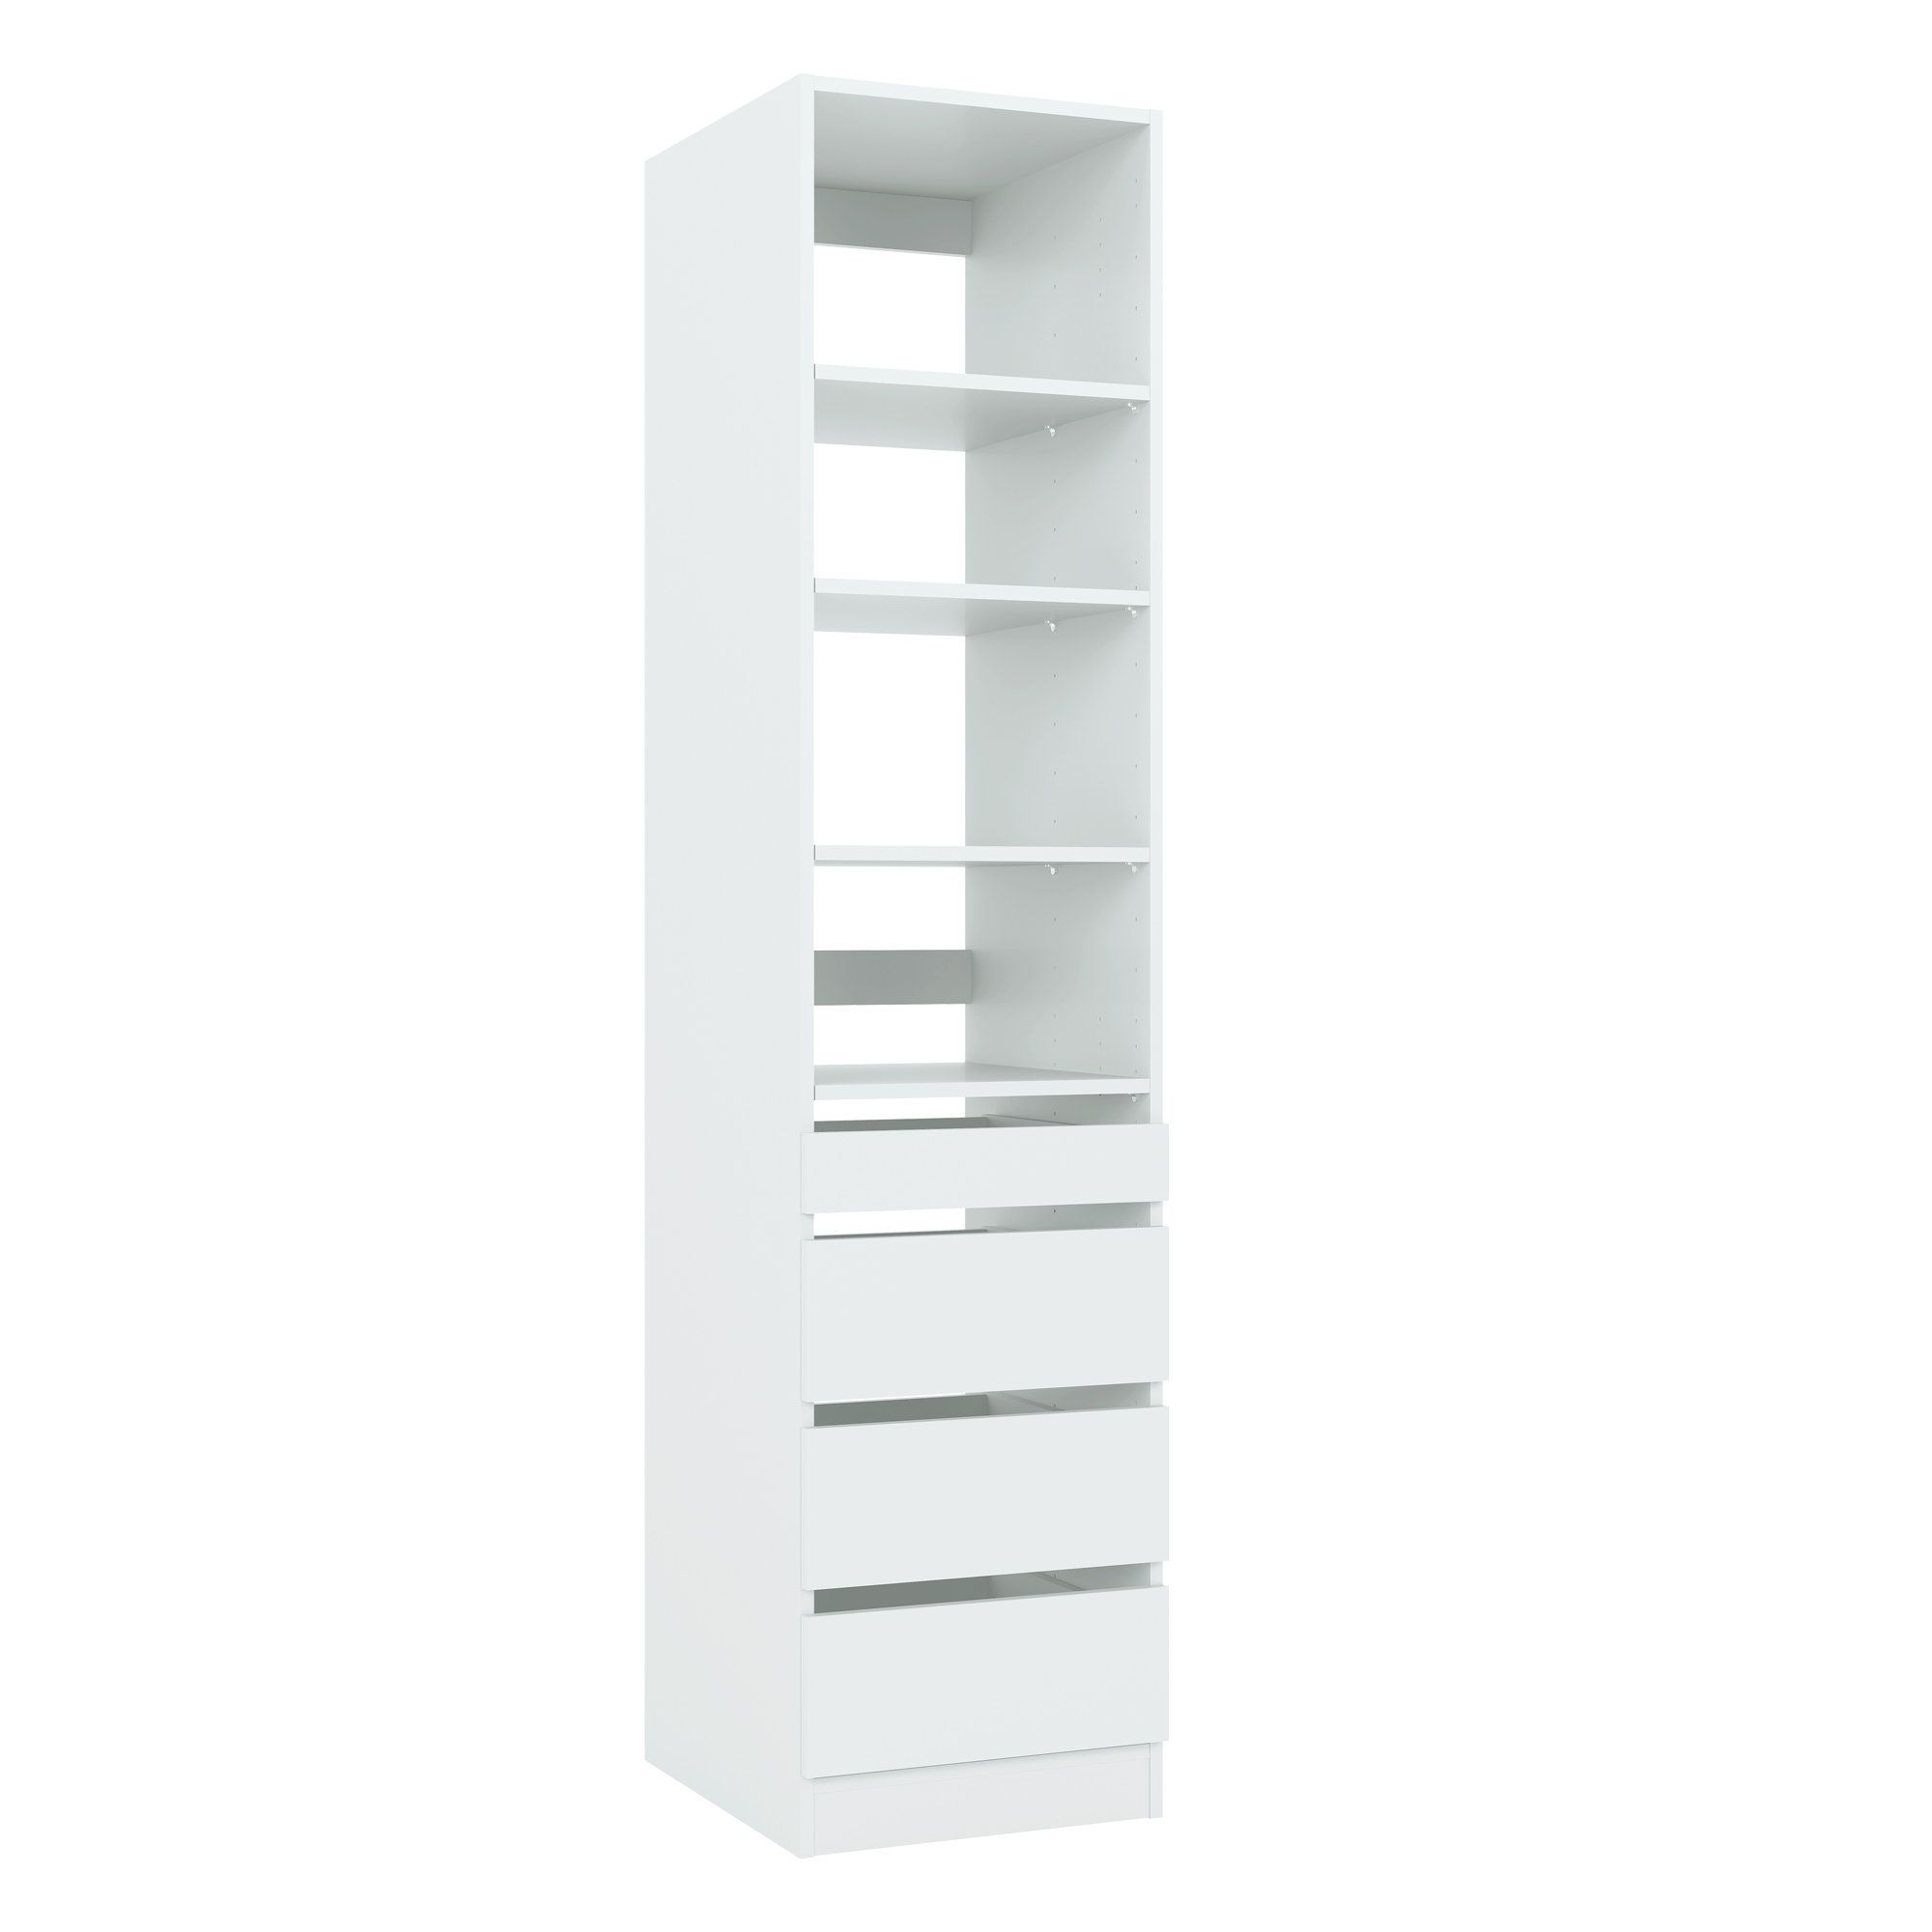 Closet & Co 18'' W Closet System Walk In Tower | Wayfair With Regard To Wardrobes With 3 Shelving Towers (Photo 8 of 15)